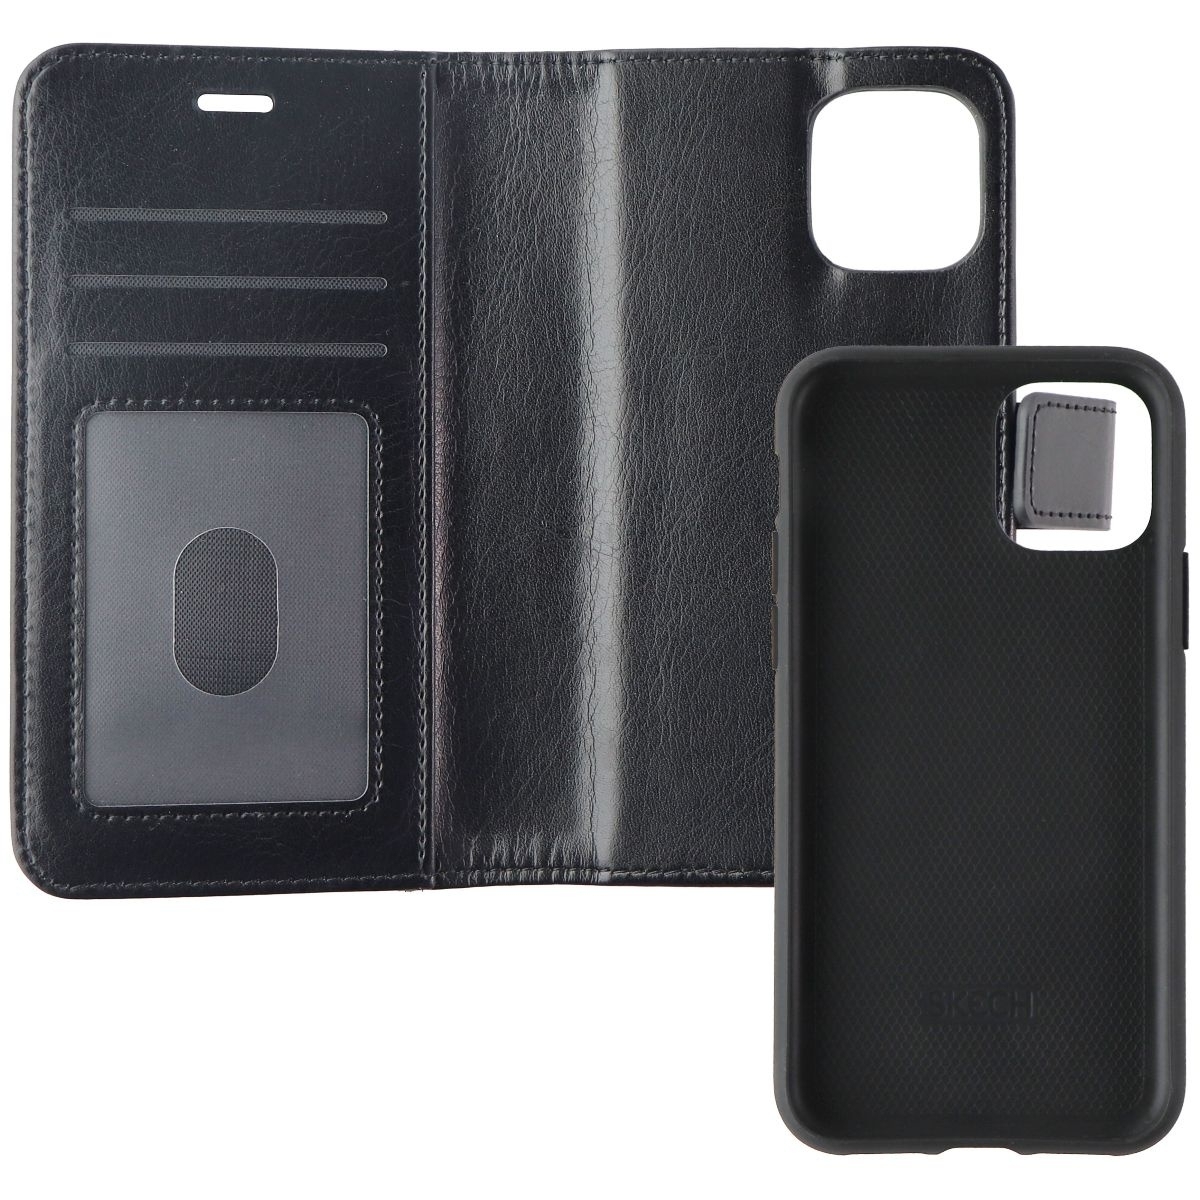 Skech Polo Book Clutch Wallet Cover & Detachable Case For IPhone 11 Pro - Black